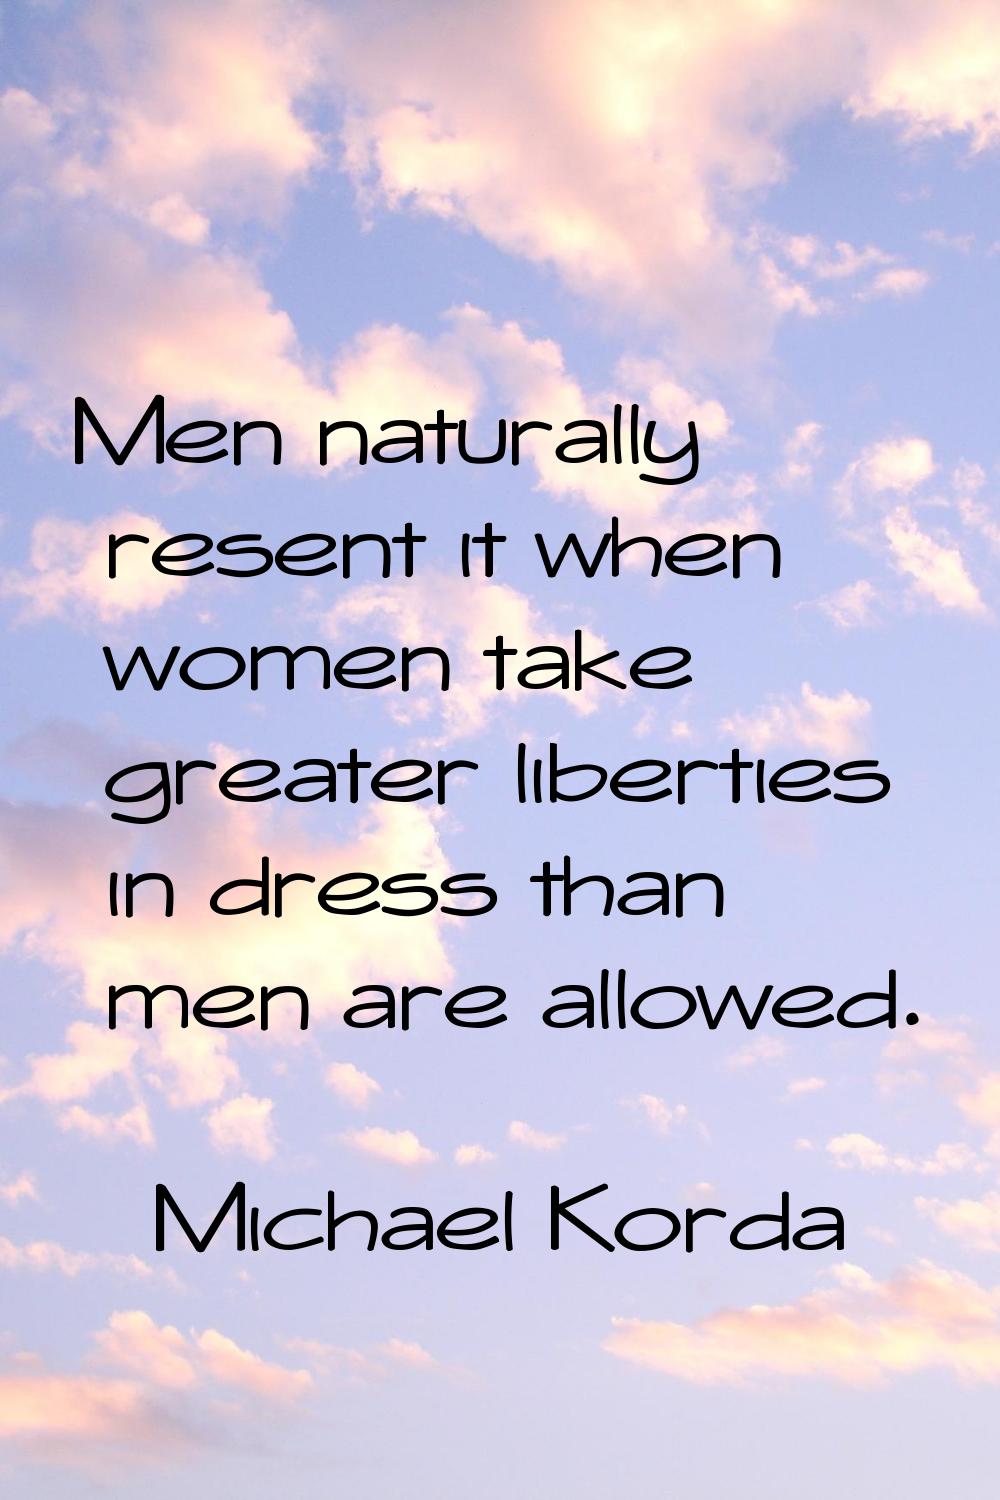 Men naturally resent it when women take greater liberties in dress than men are allowed.